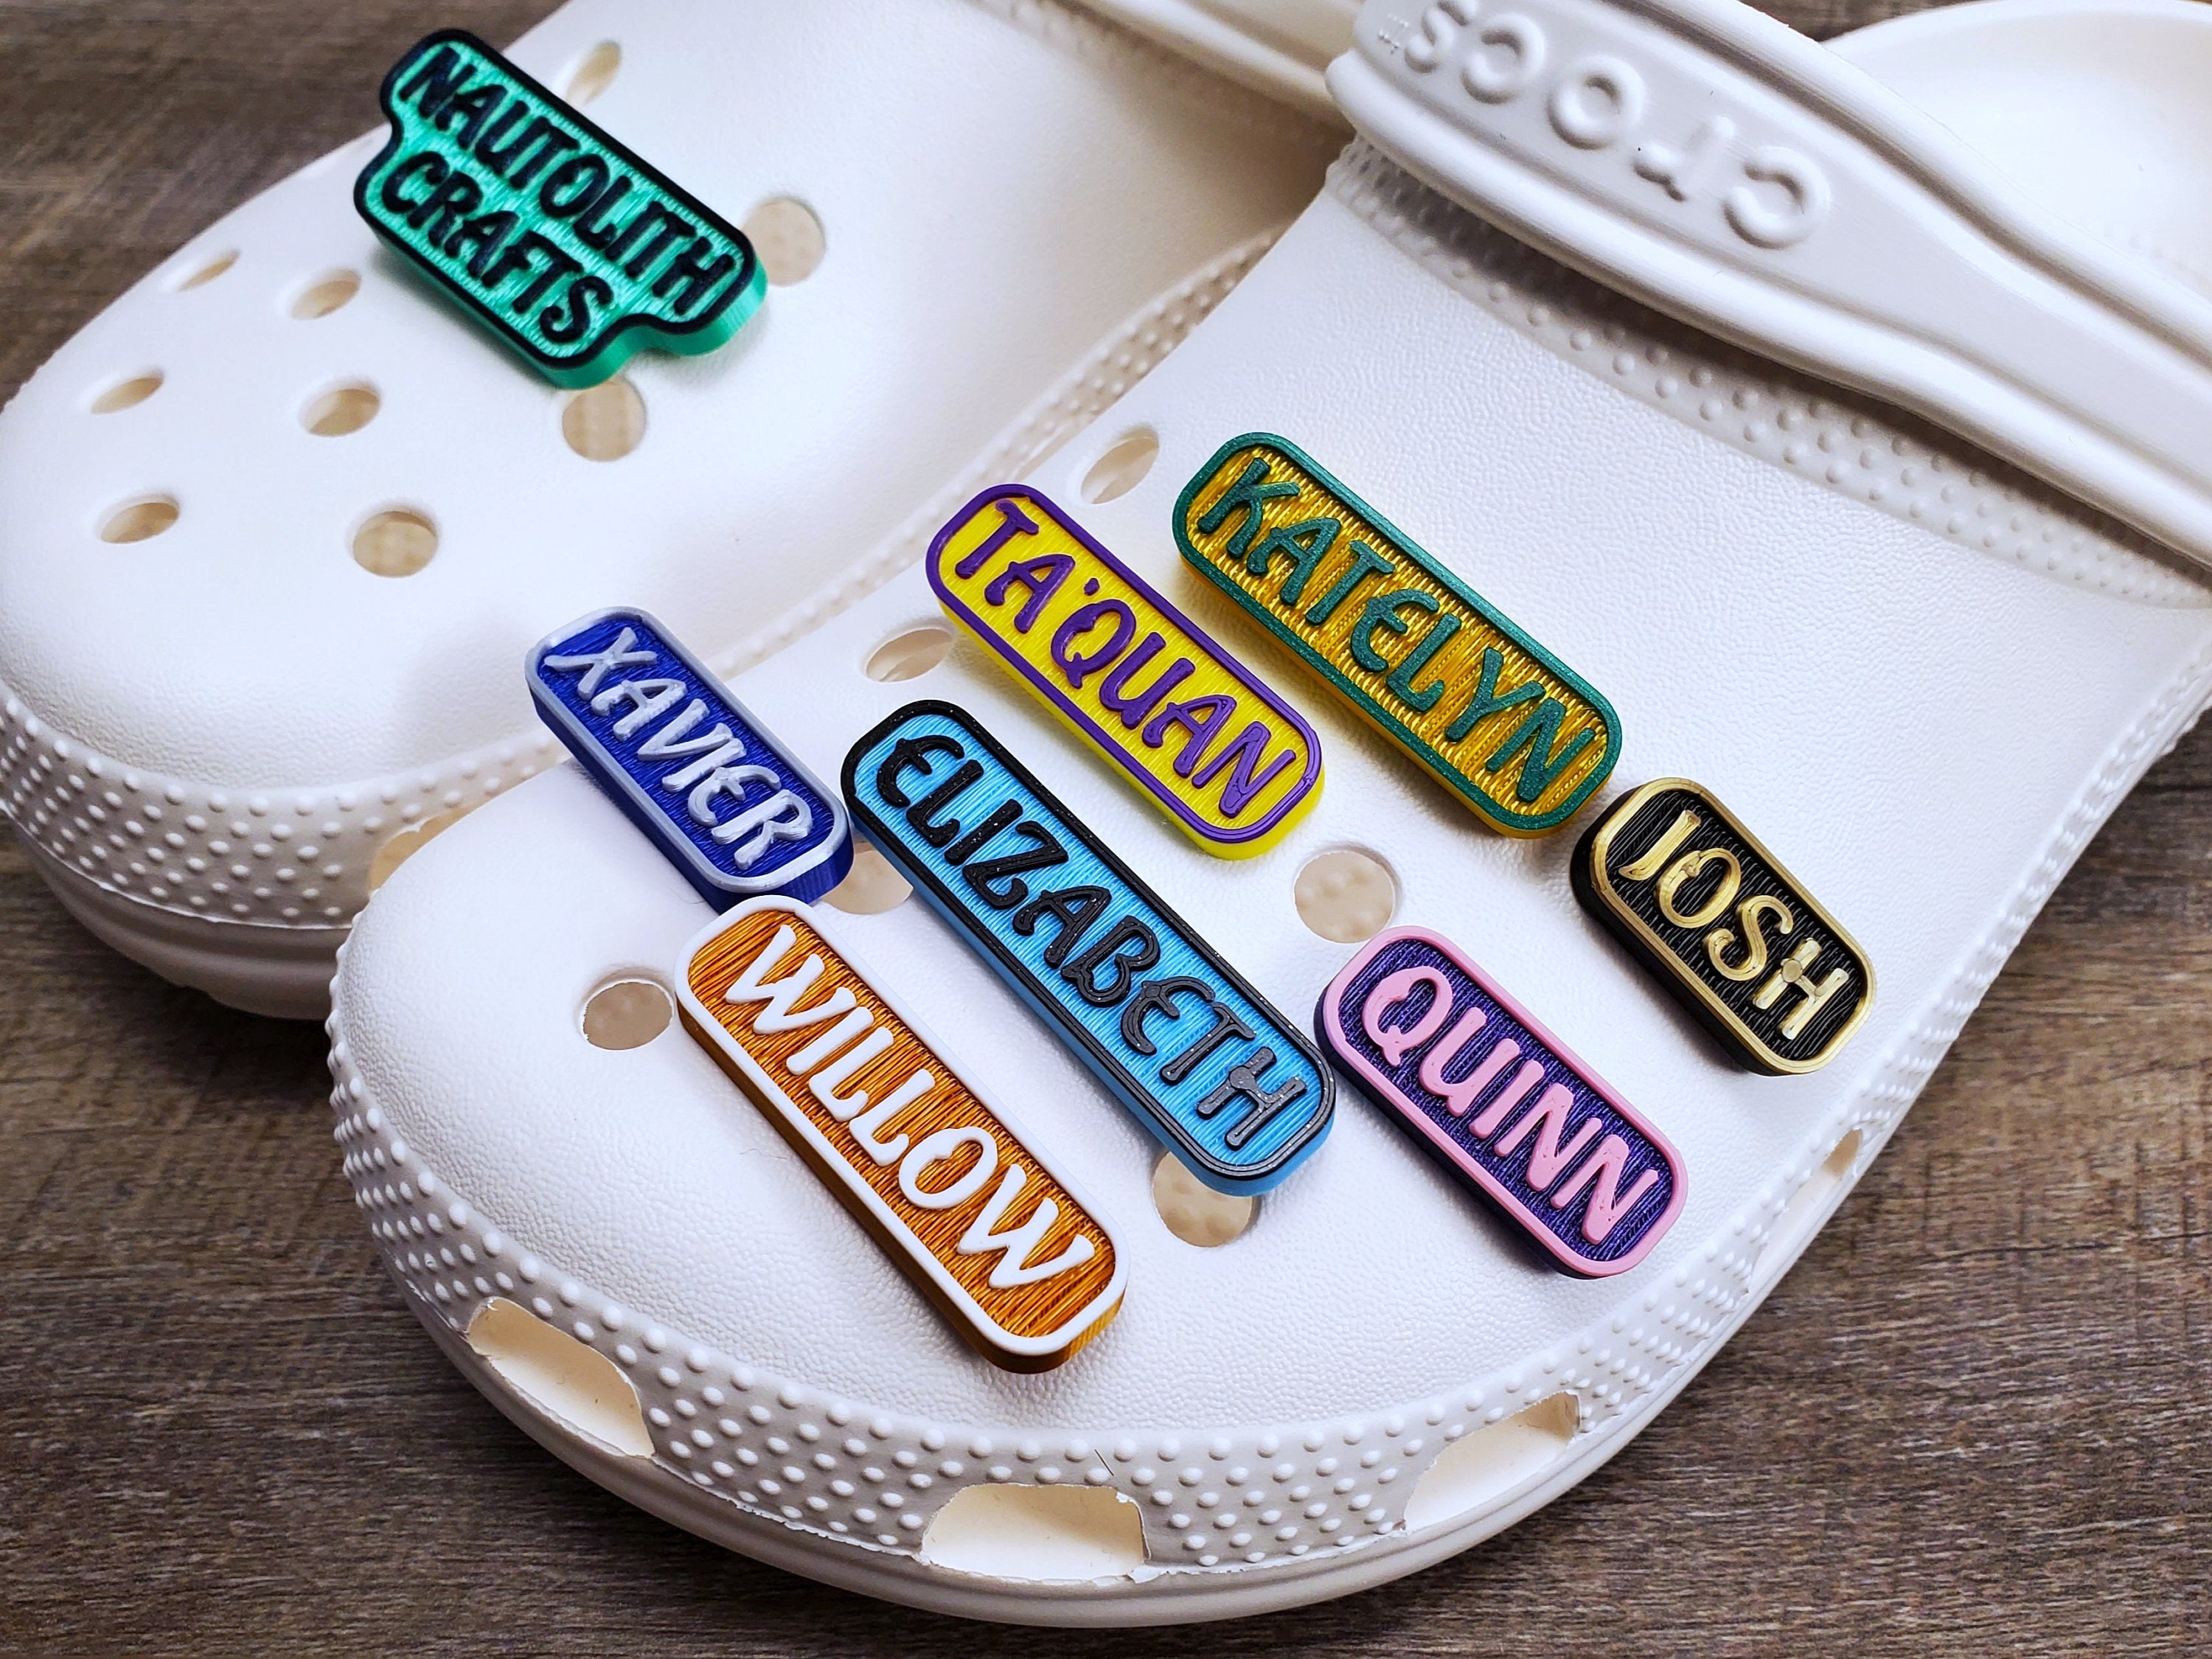 DEVOUEX 16pcs Bling Croc Charms for Women Girls, Sea Style Designer Charms for Clog Sandals Shoe Decoration, Nature Shoe Charms for Girls, Summer